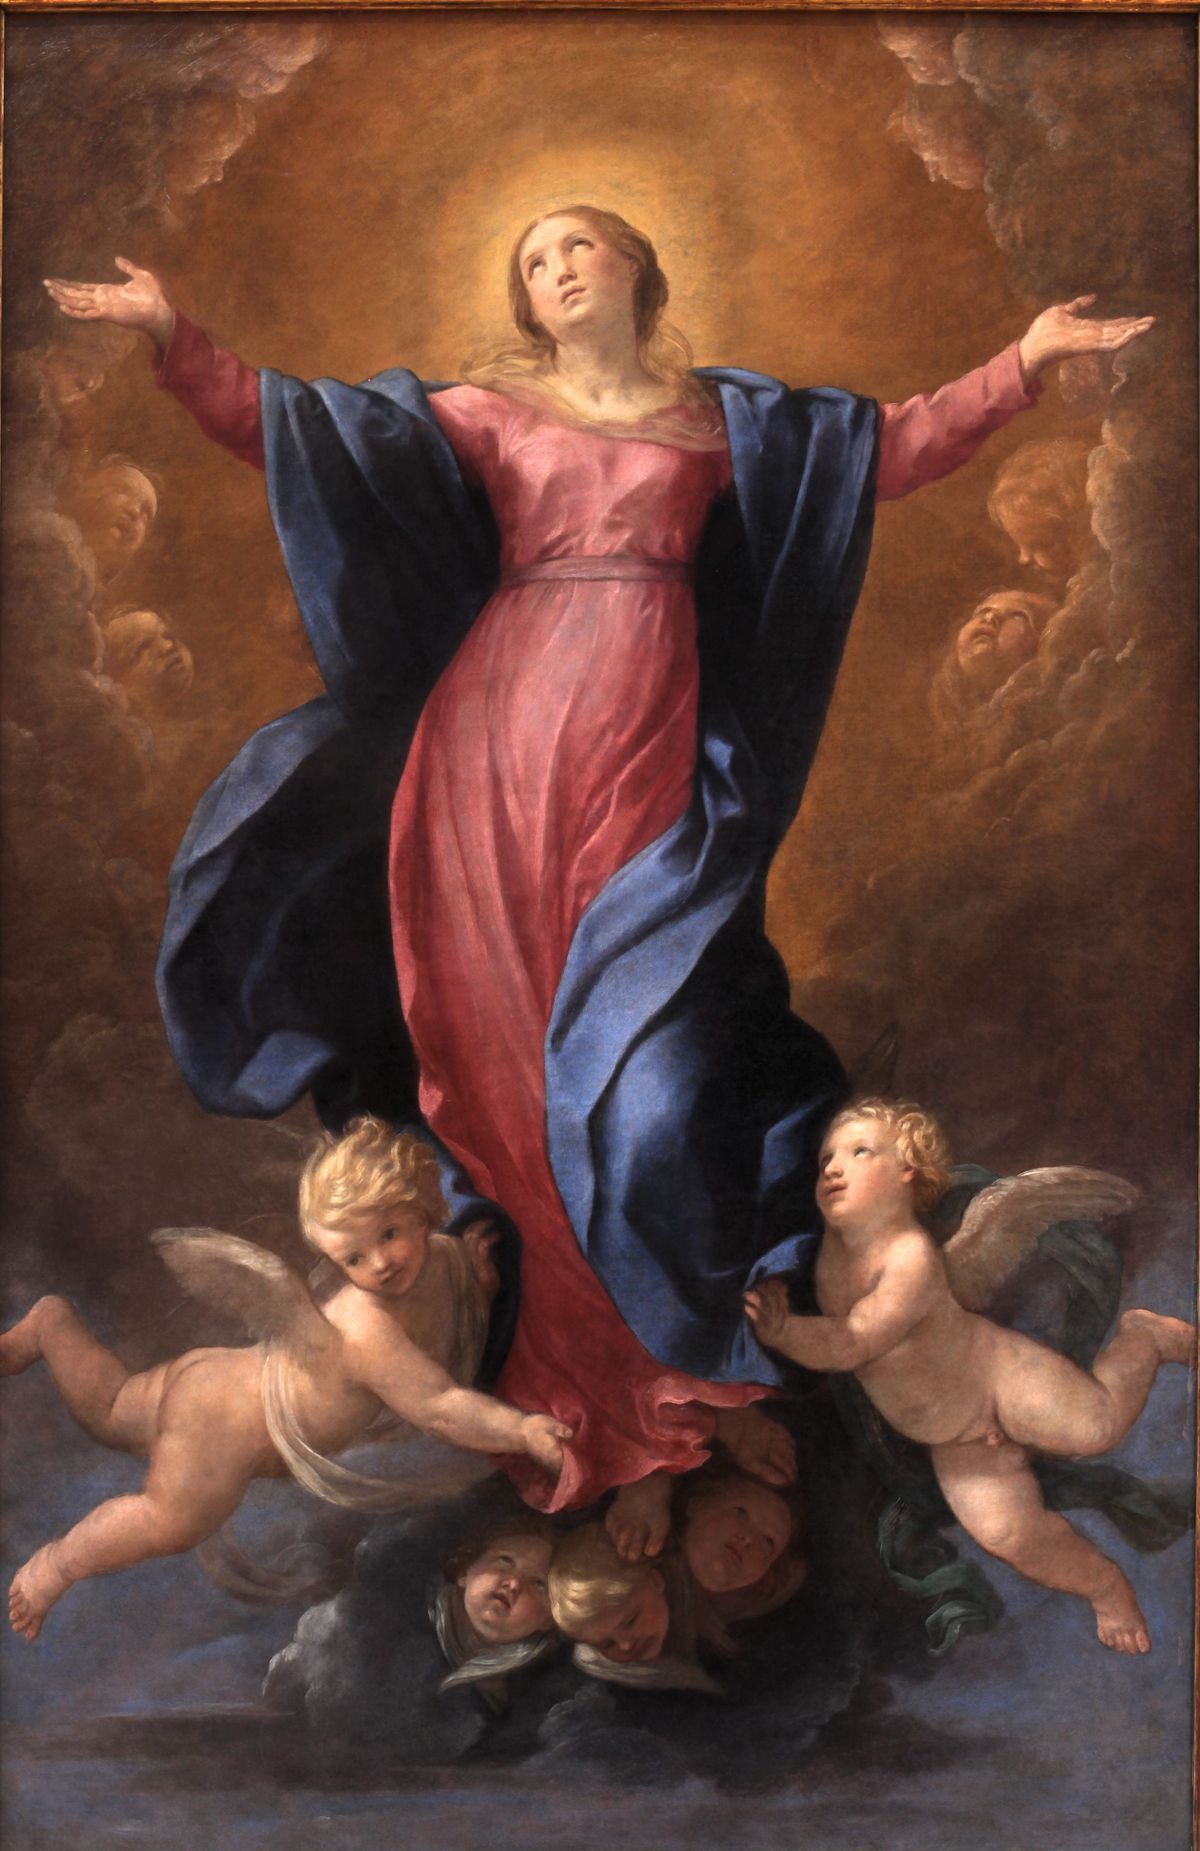 Assumption of the Virgin (1637) by Guido Reni - Public Domain Catholic Painting